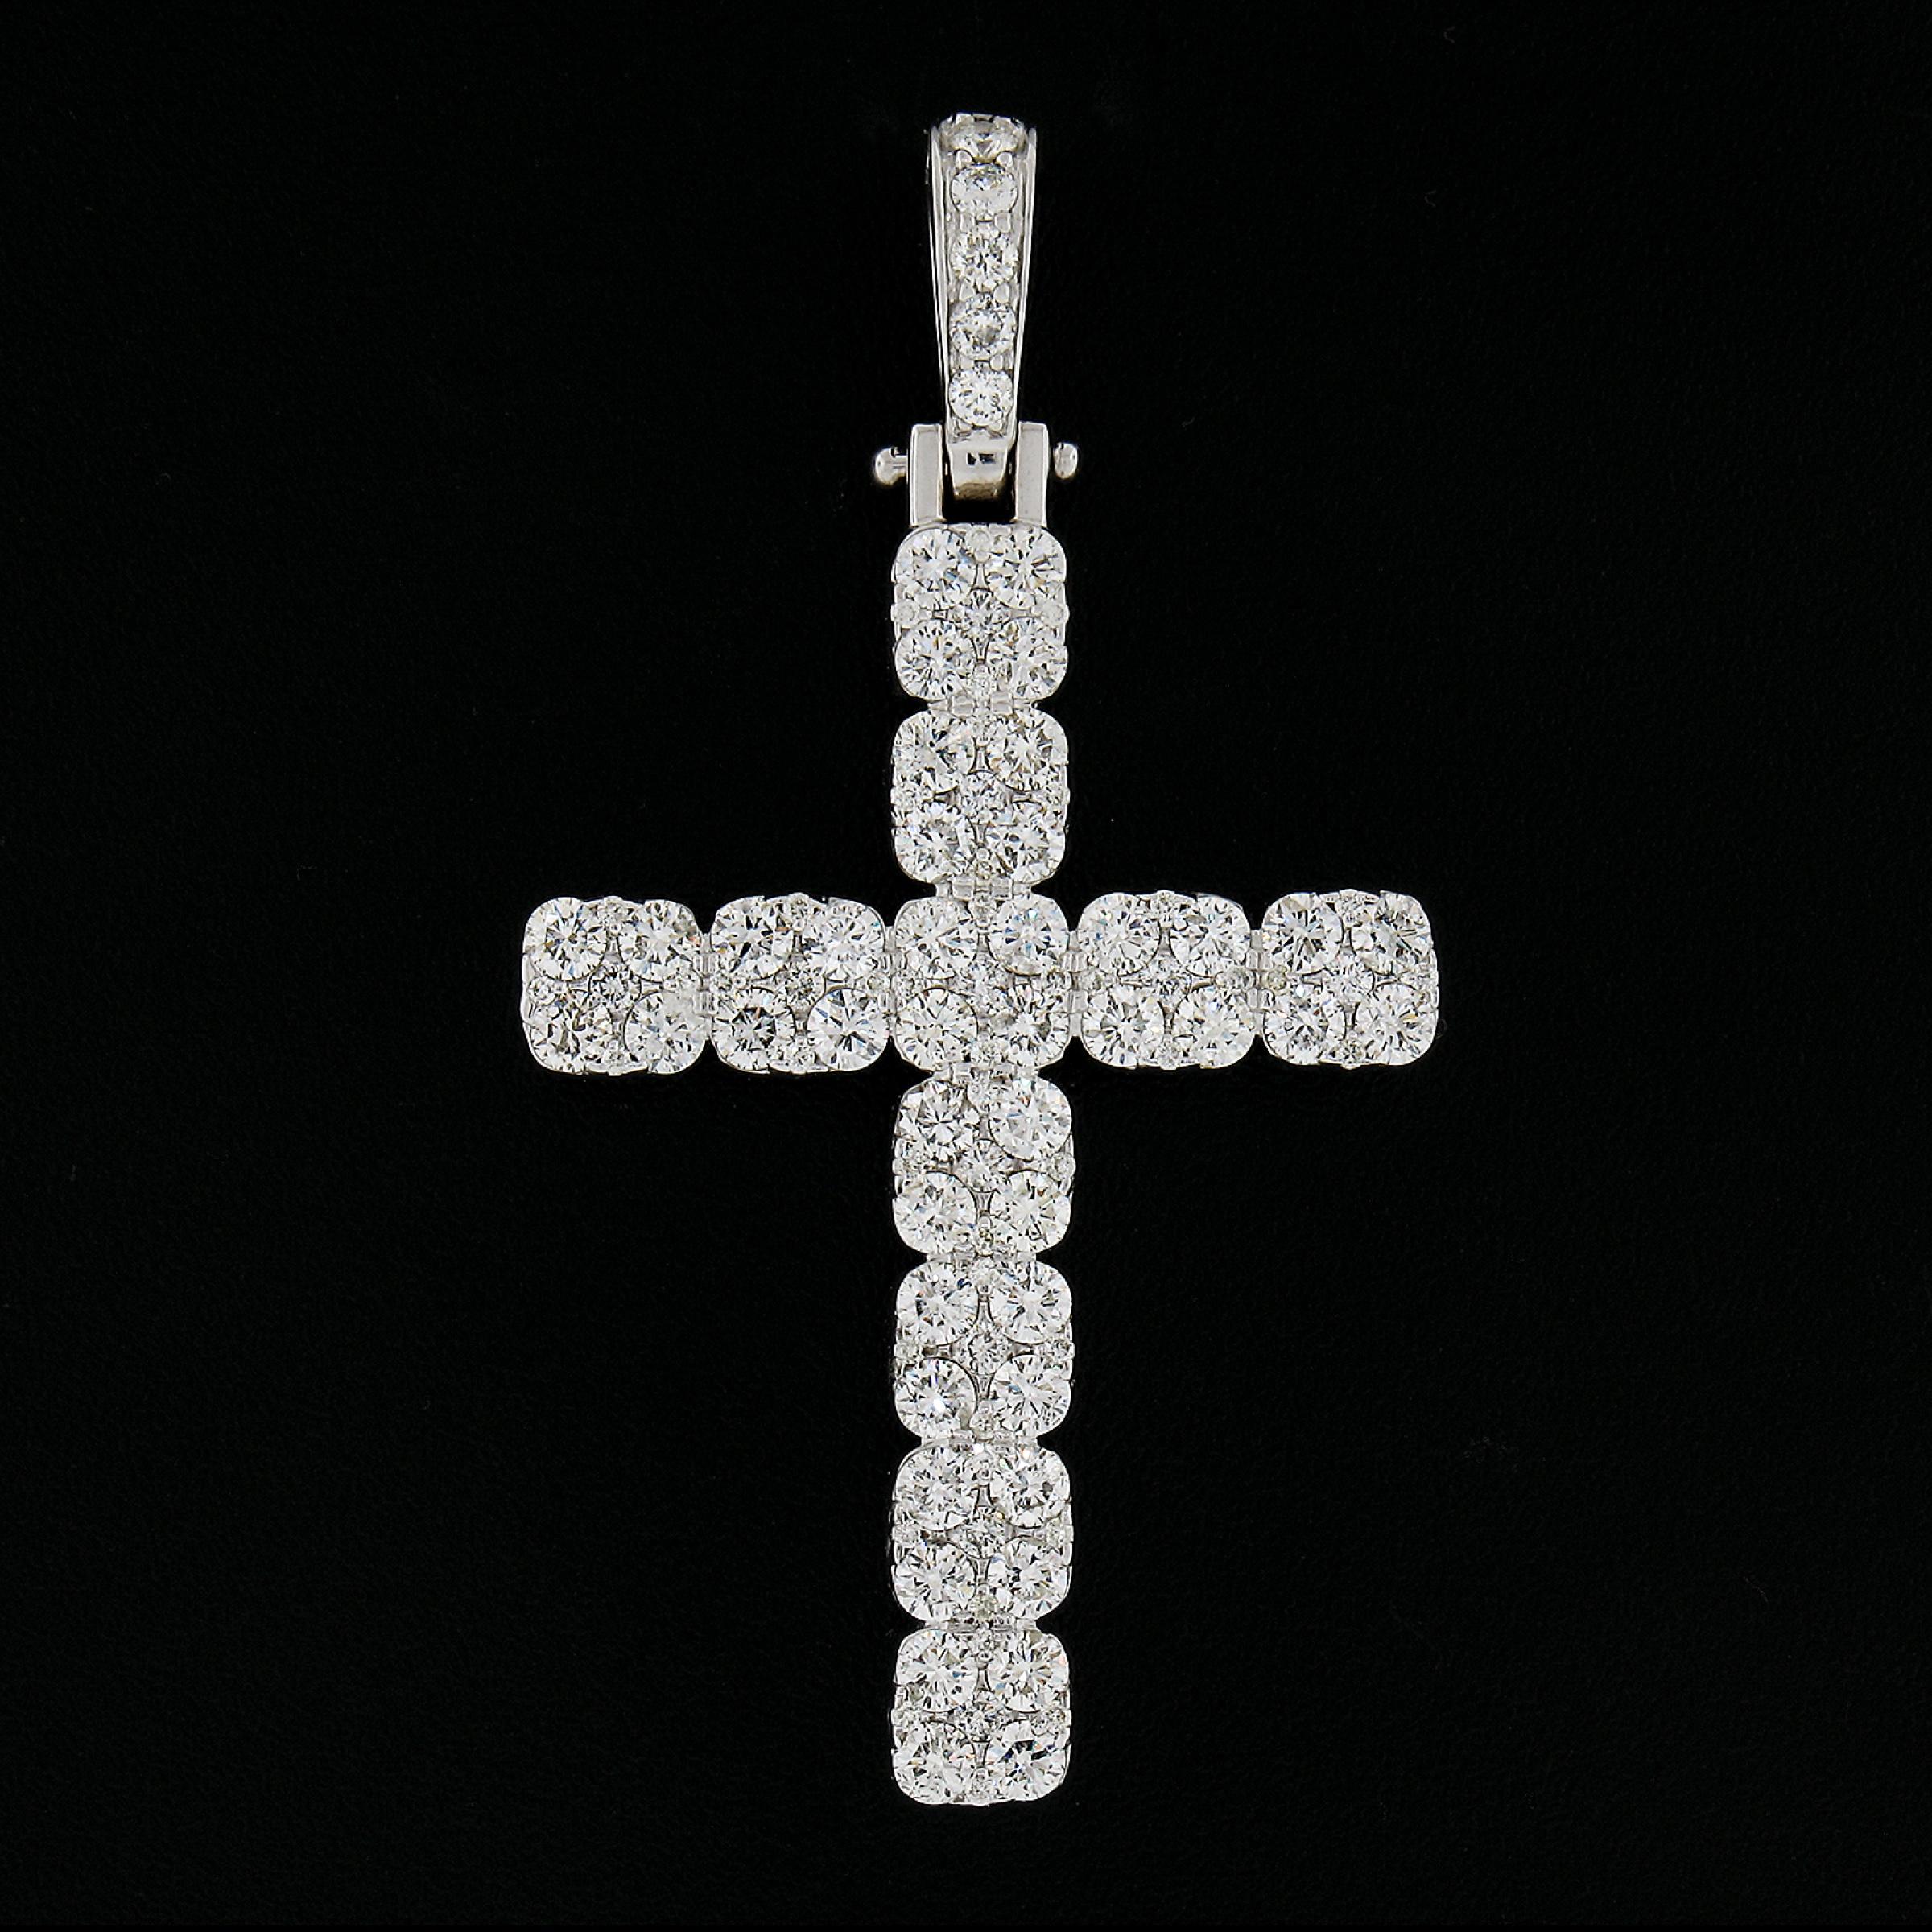 --Stones:--
104 Natural Genuine Diamonds - Round Brilliant Cut - Prong & Pave Set - VS1-I1 Clarity - G-L Color
Total Carat Weight:	3.30ctw approx.

Material: 14K Solid White Gold
Weight: 7.65 Grams
Chain Type: Not Included
Width: 25.7mm (1